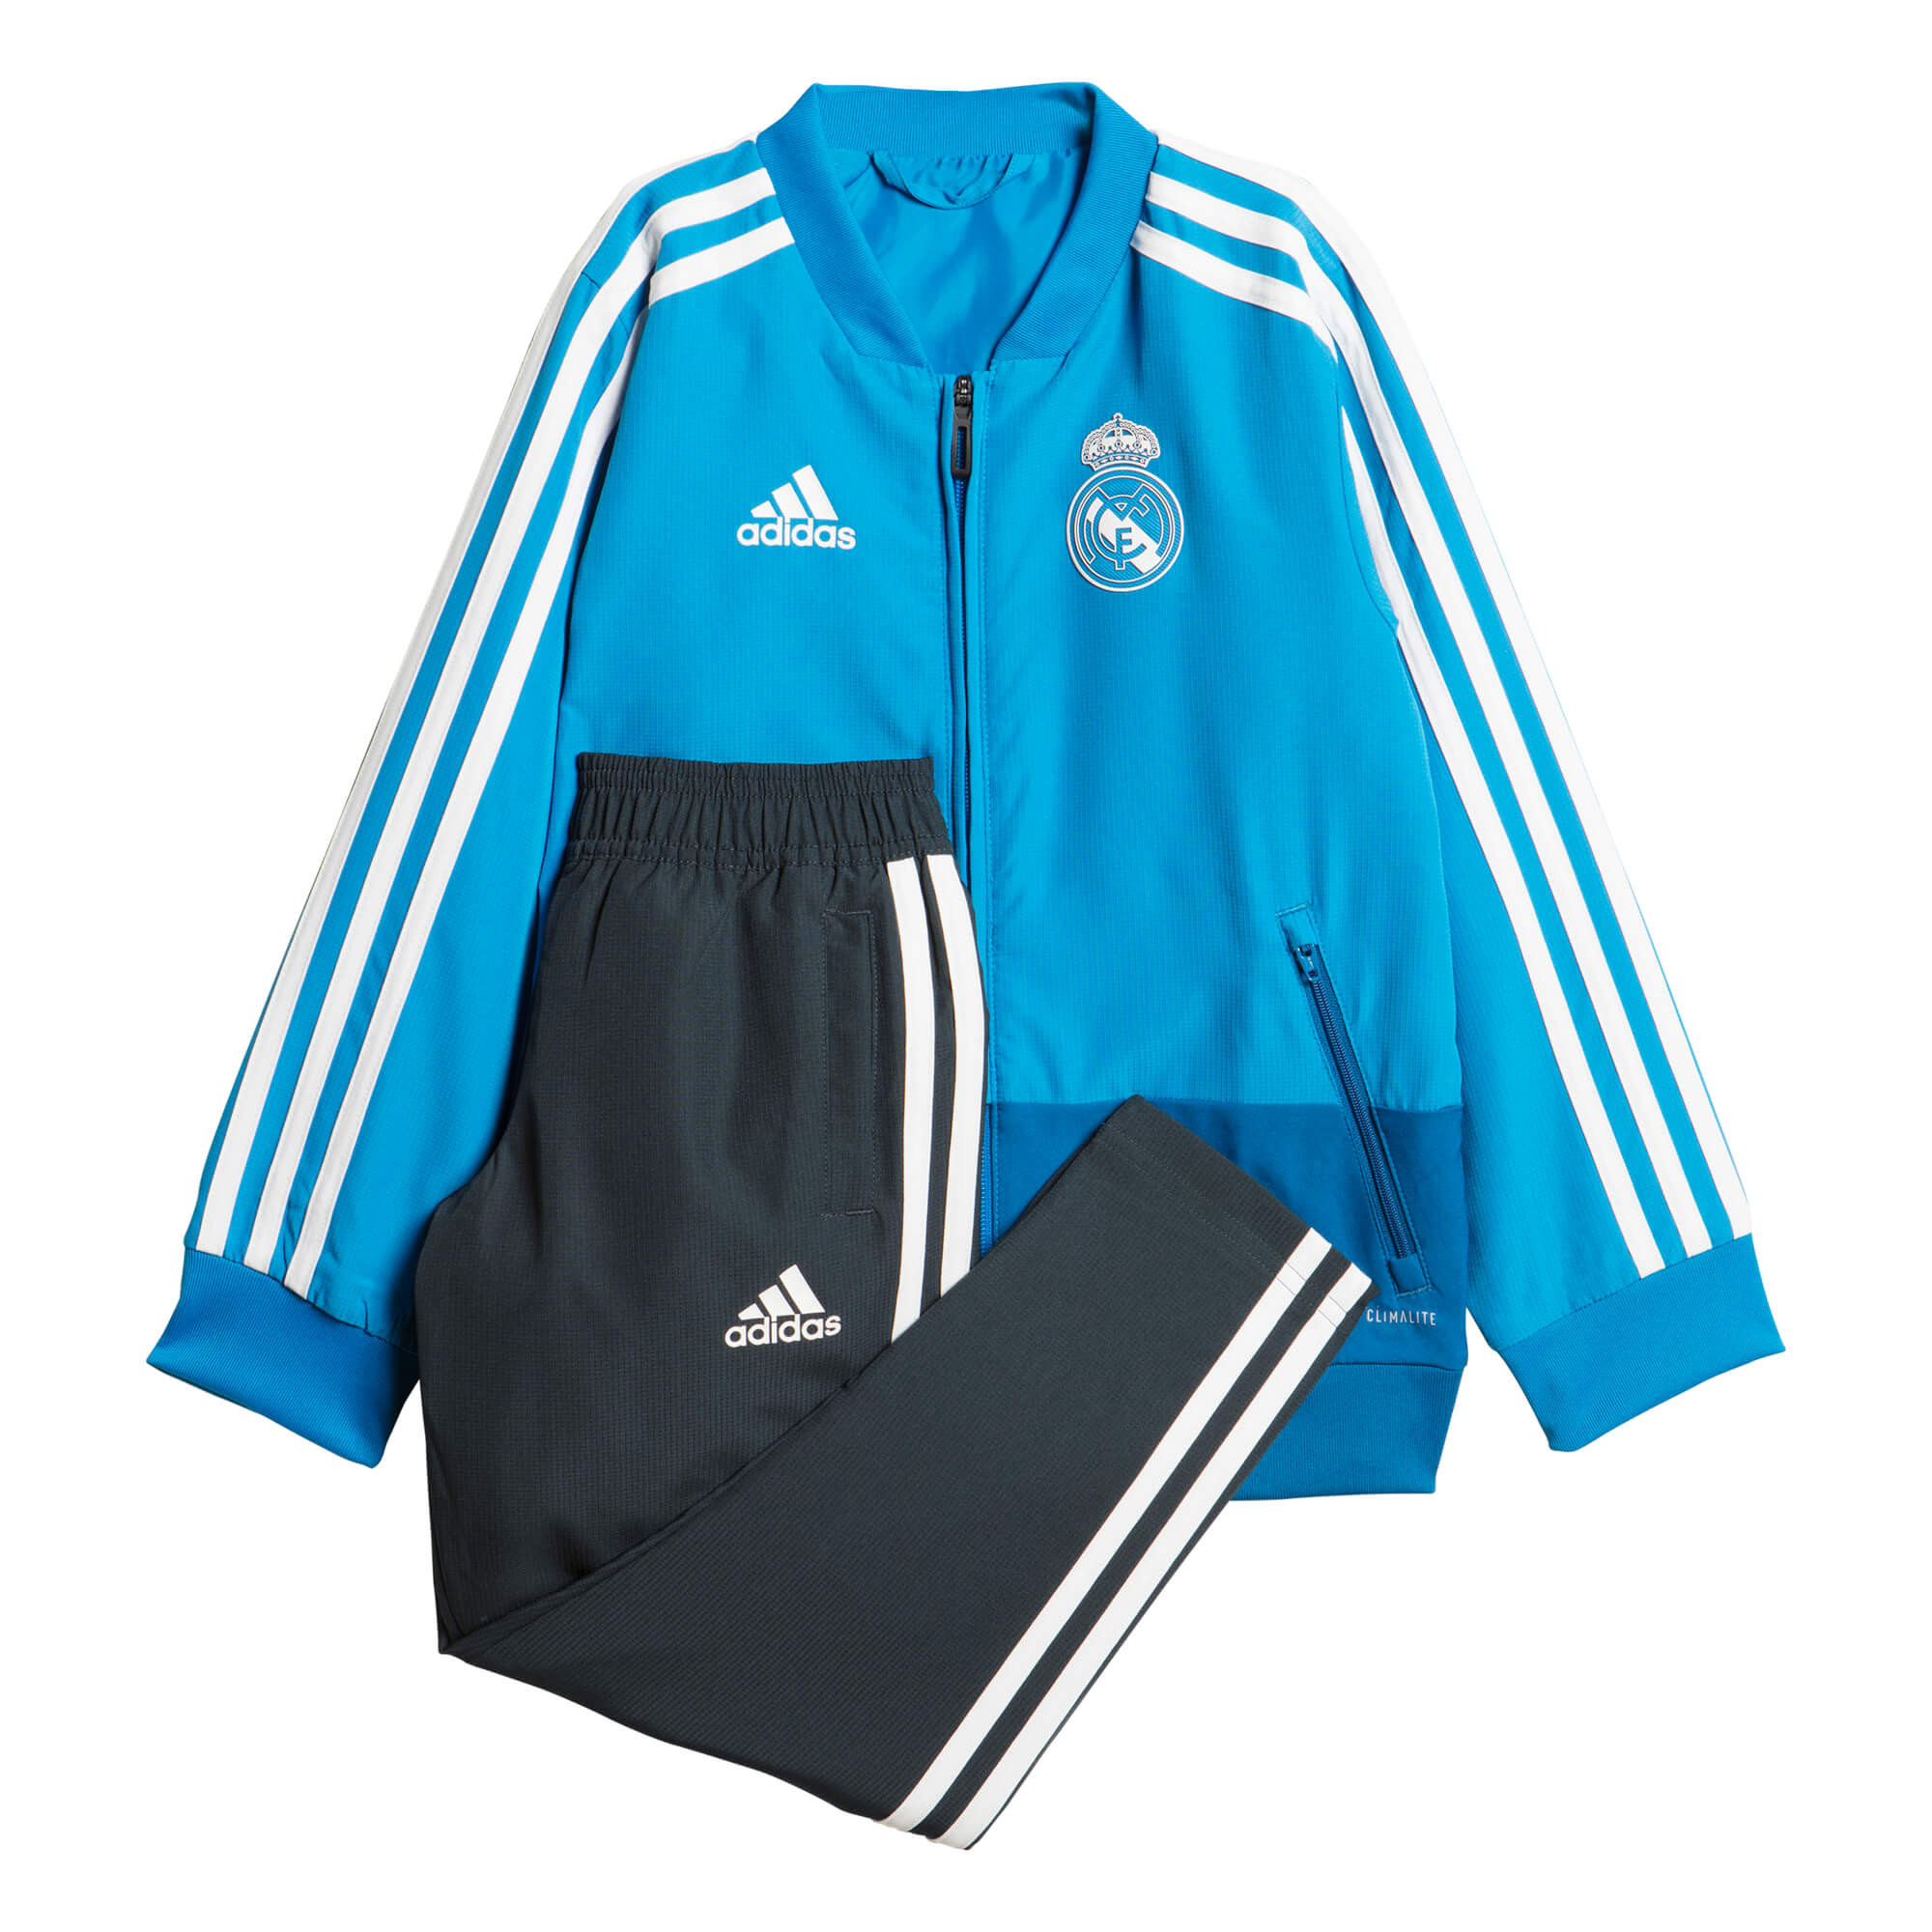 ADIDAS REAL MADRID PRE SUIT IN BLEU 2019